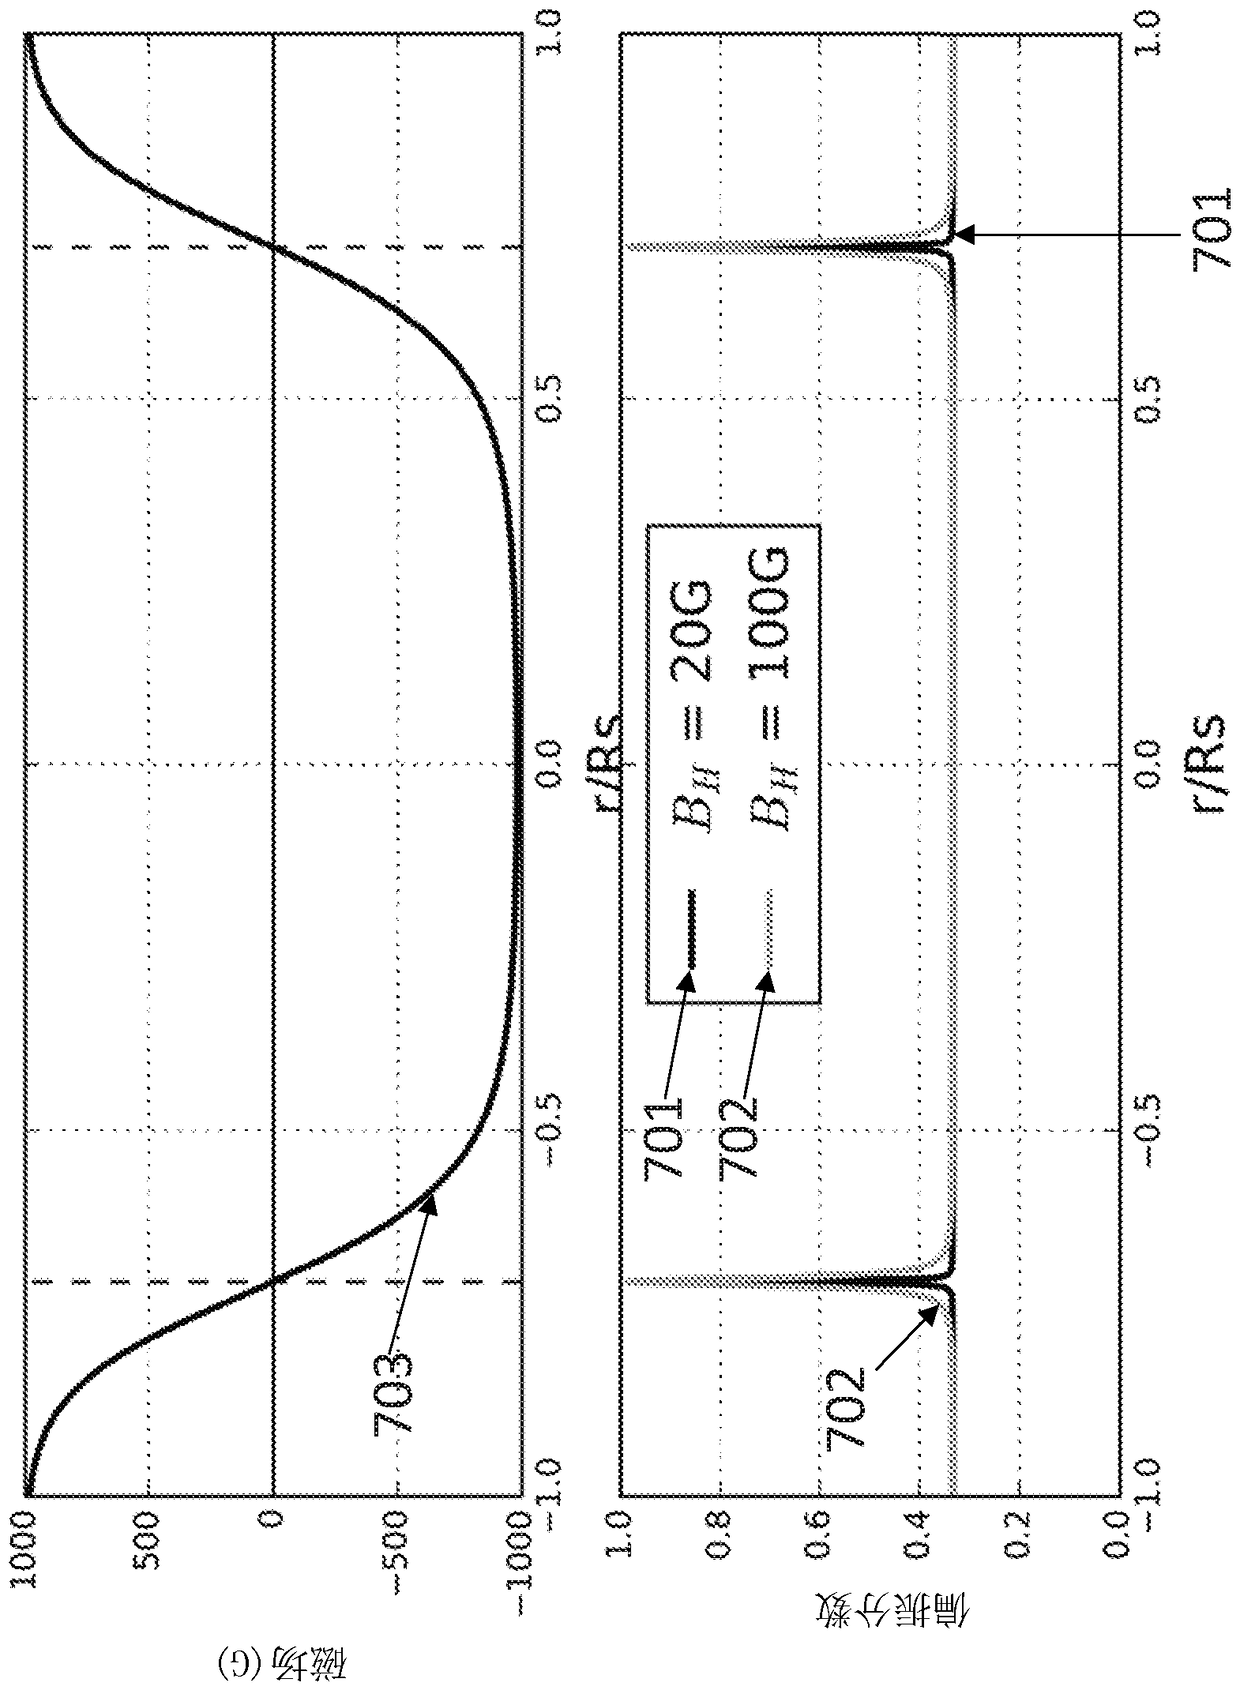 Non-pertubative measurements of low and null magnetic field in high temperature plasmas